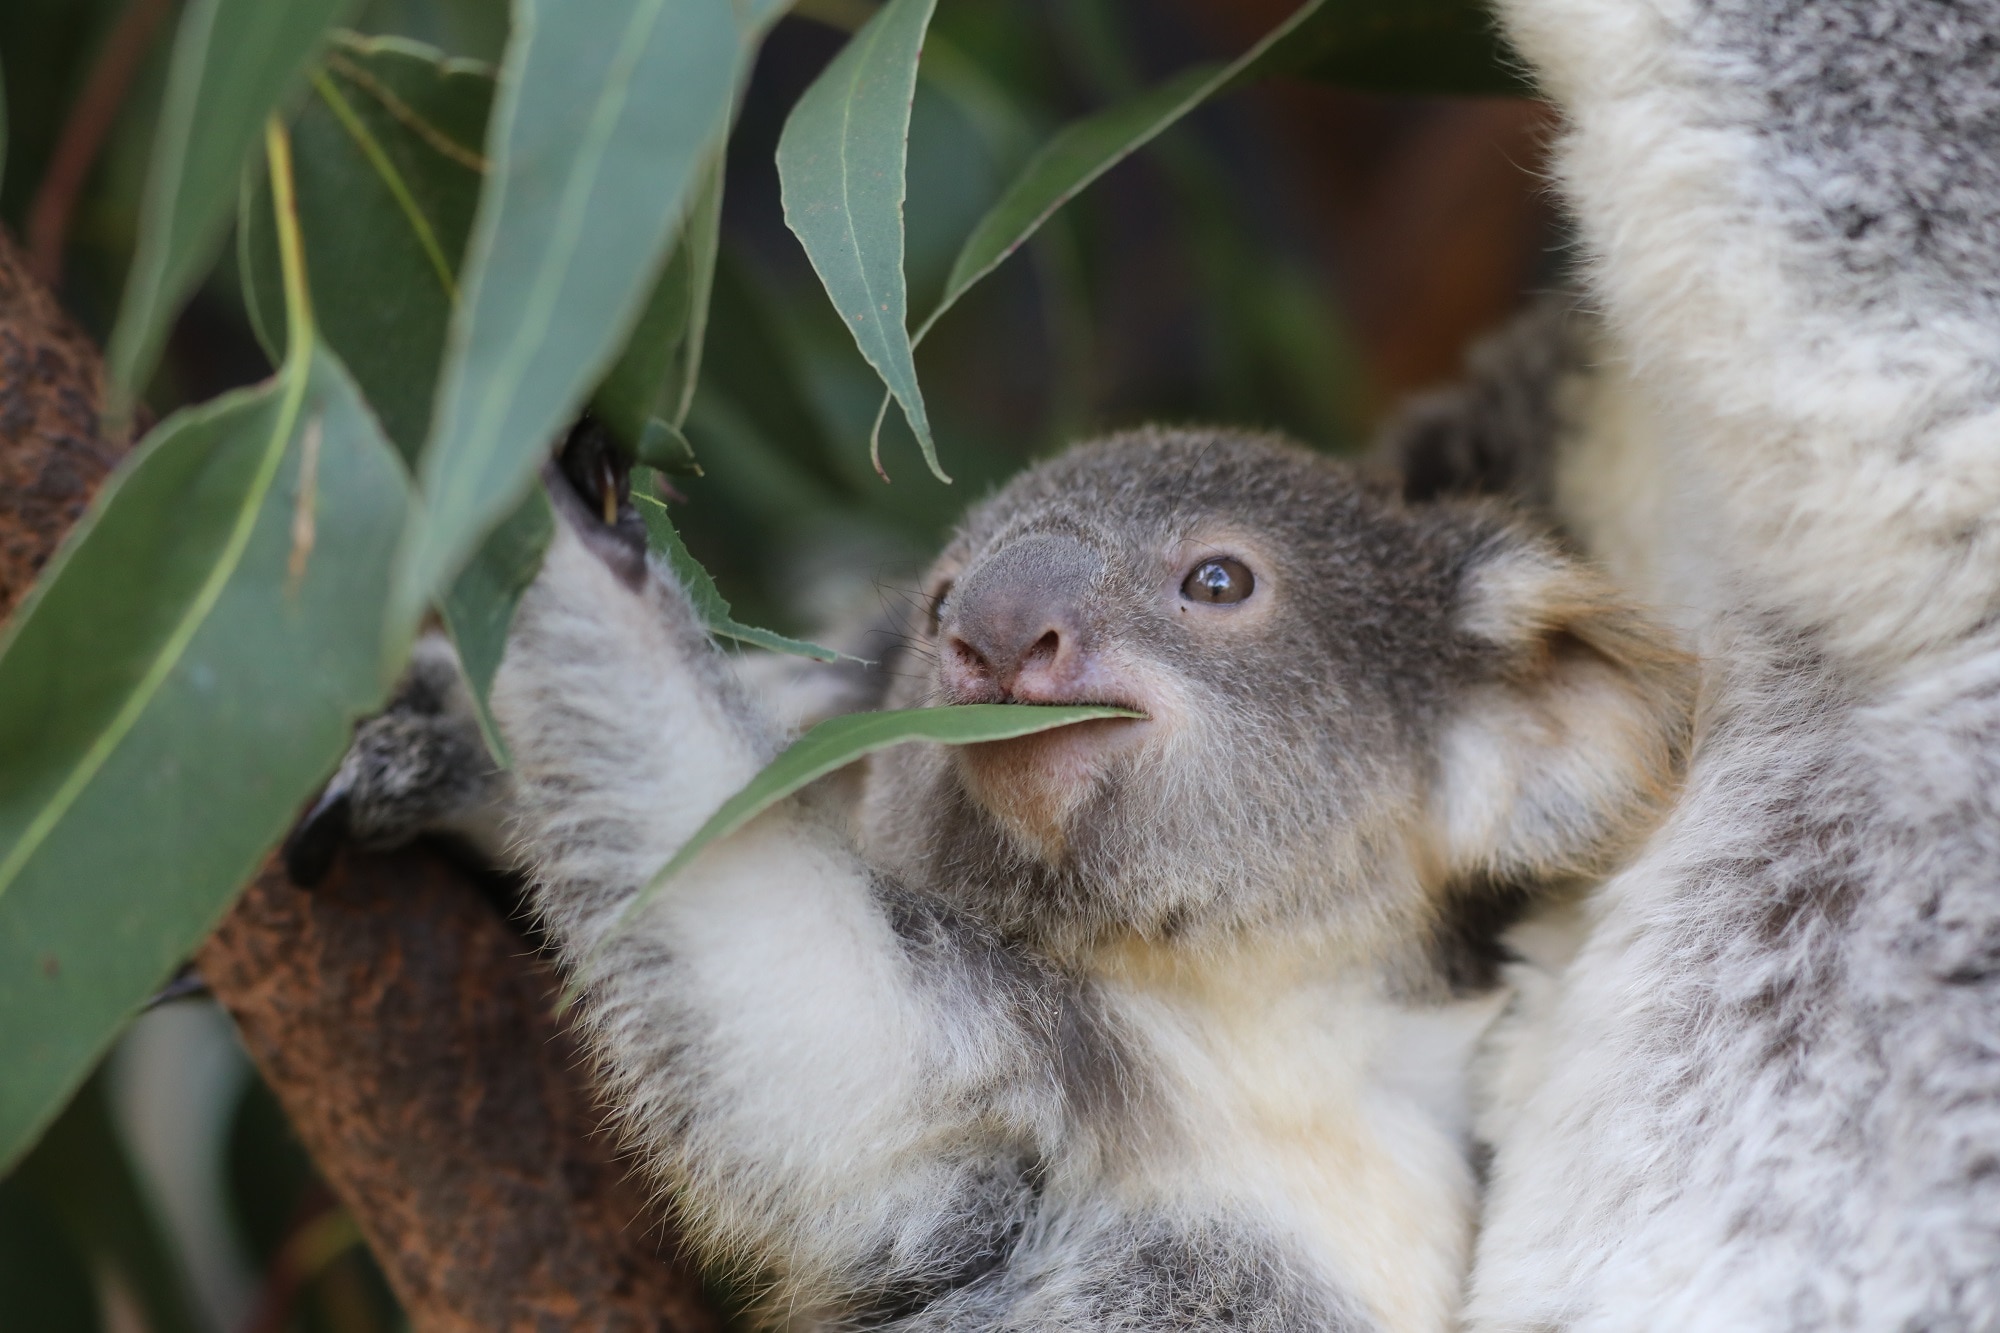 Tippi is the eldest of six confirmed joeys this year as part of the Australian Reptile Park’s koala conservation breeding program.